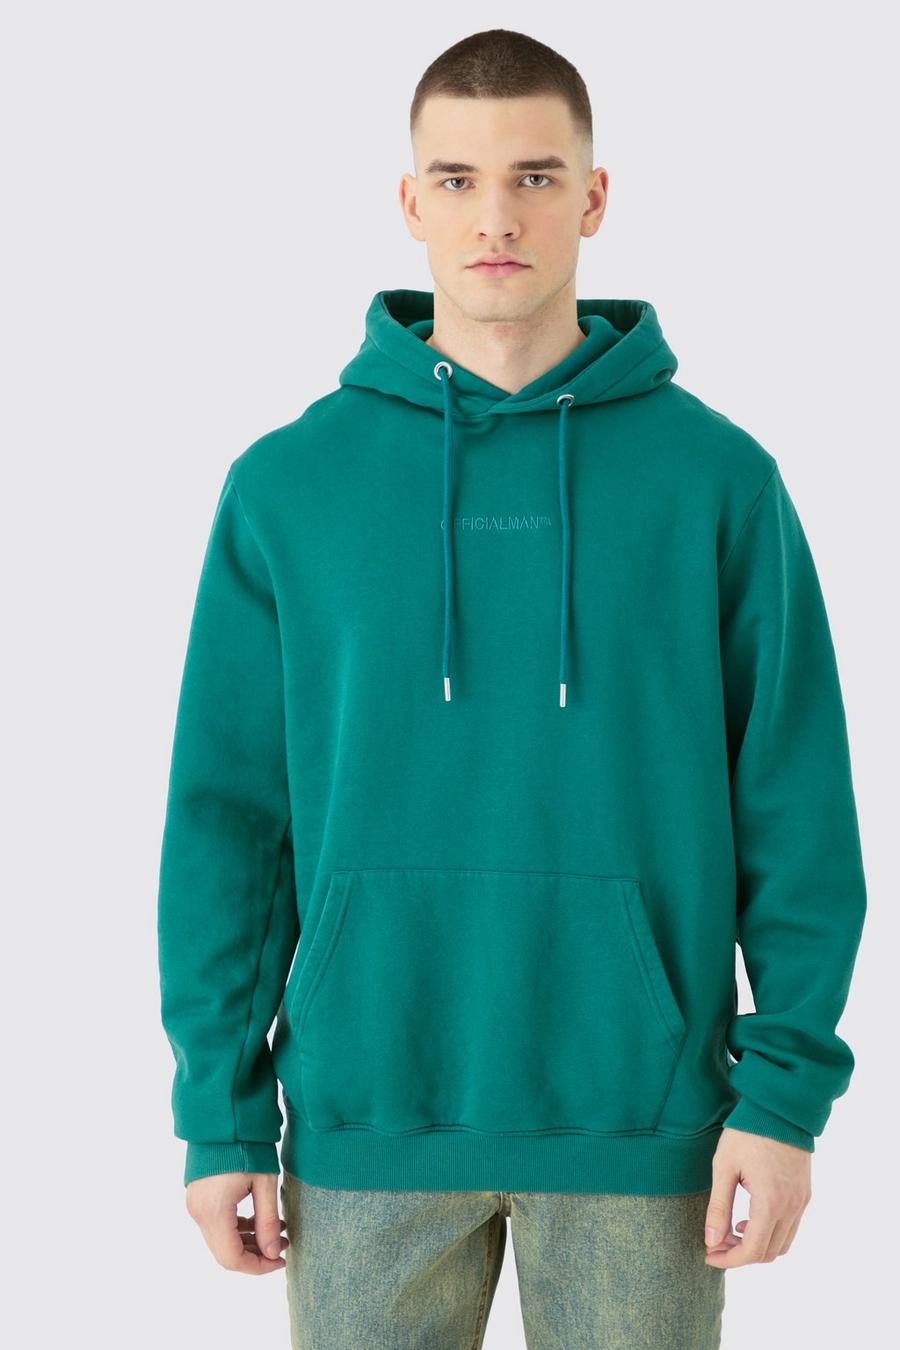 Teal Tall Laundered Wash Official Over Head Hoodie